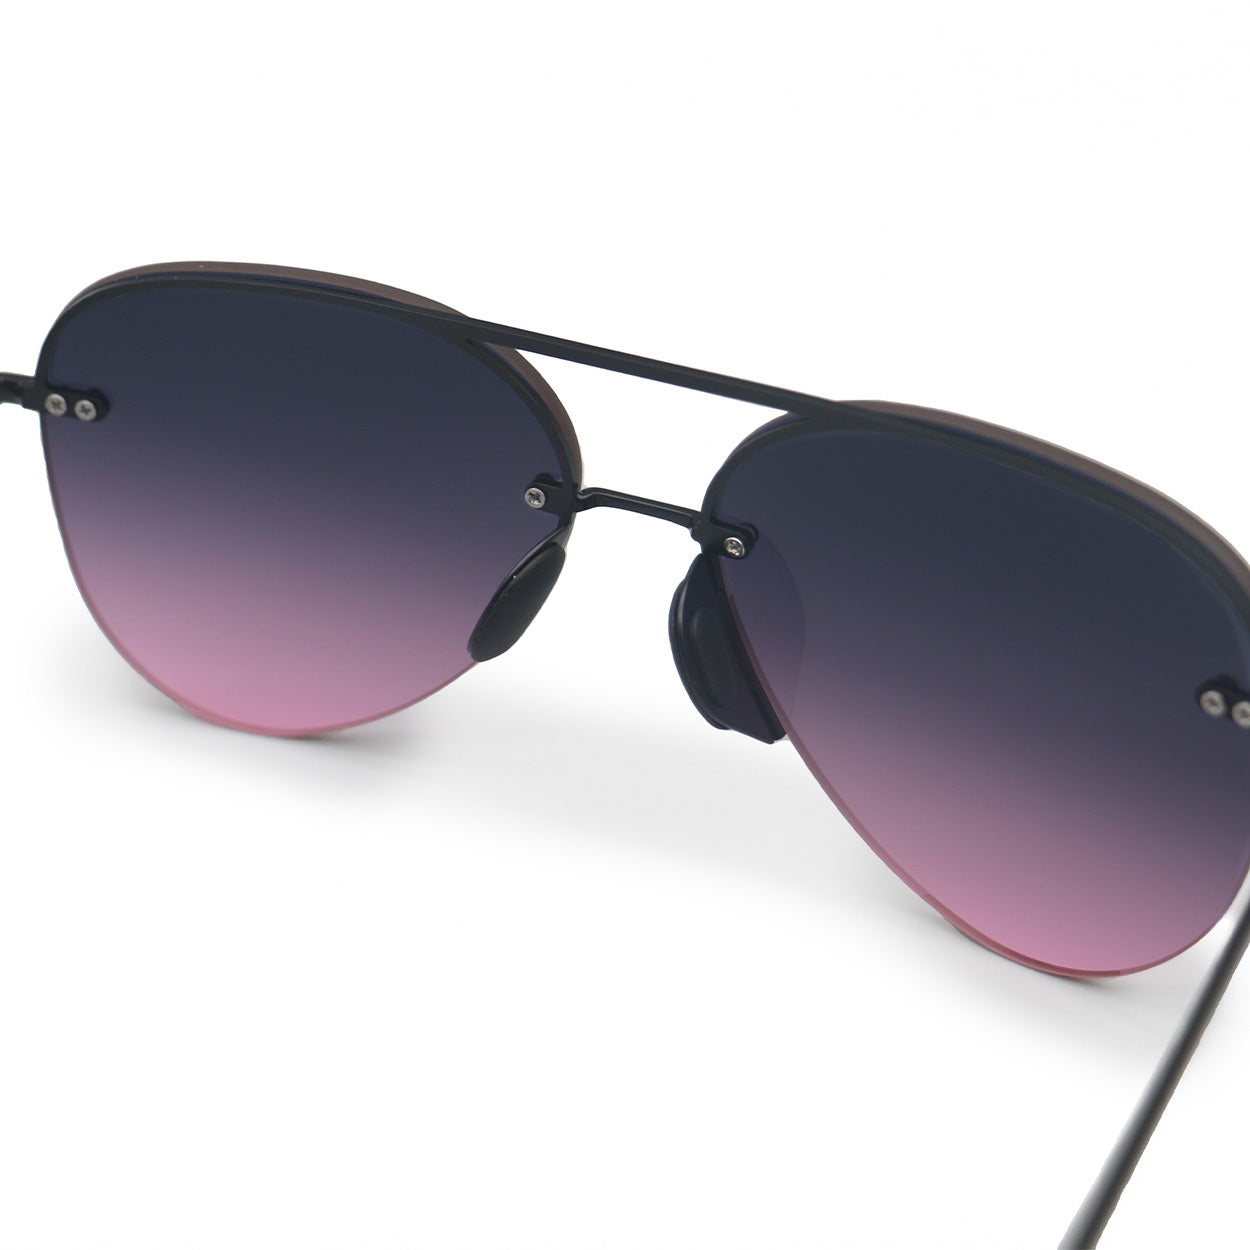 White background close up image of classic aviators with no nosepad and faded purple pink lenses with metal detailing